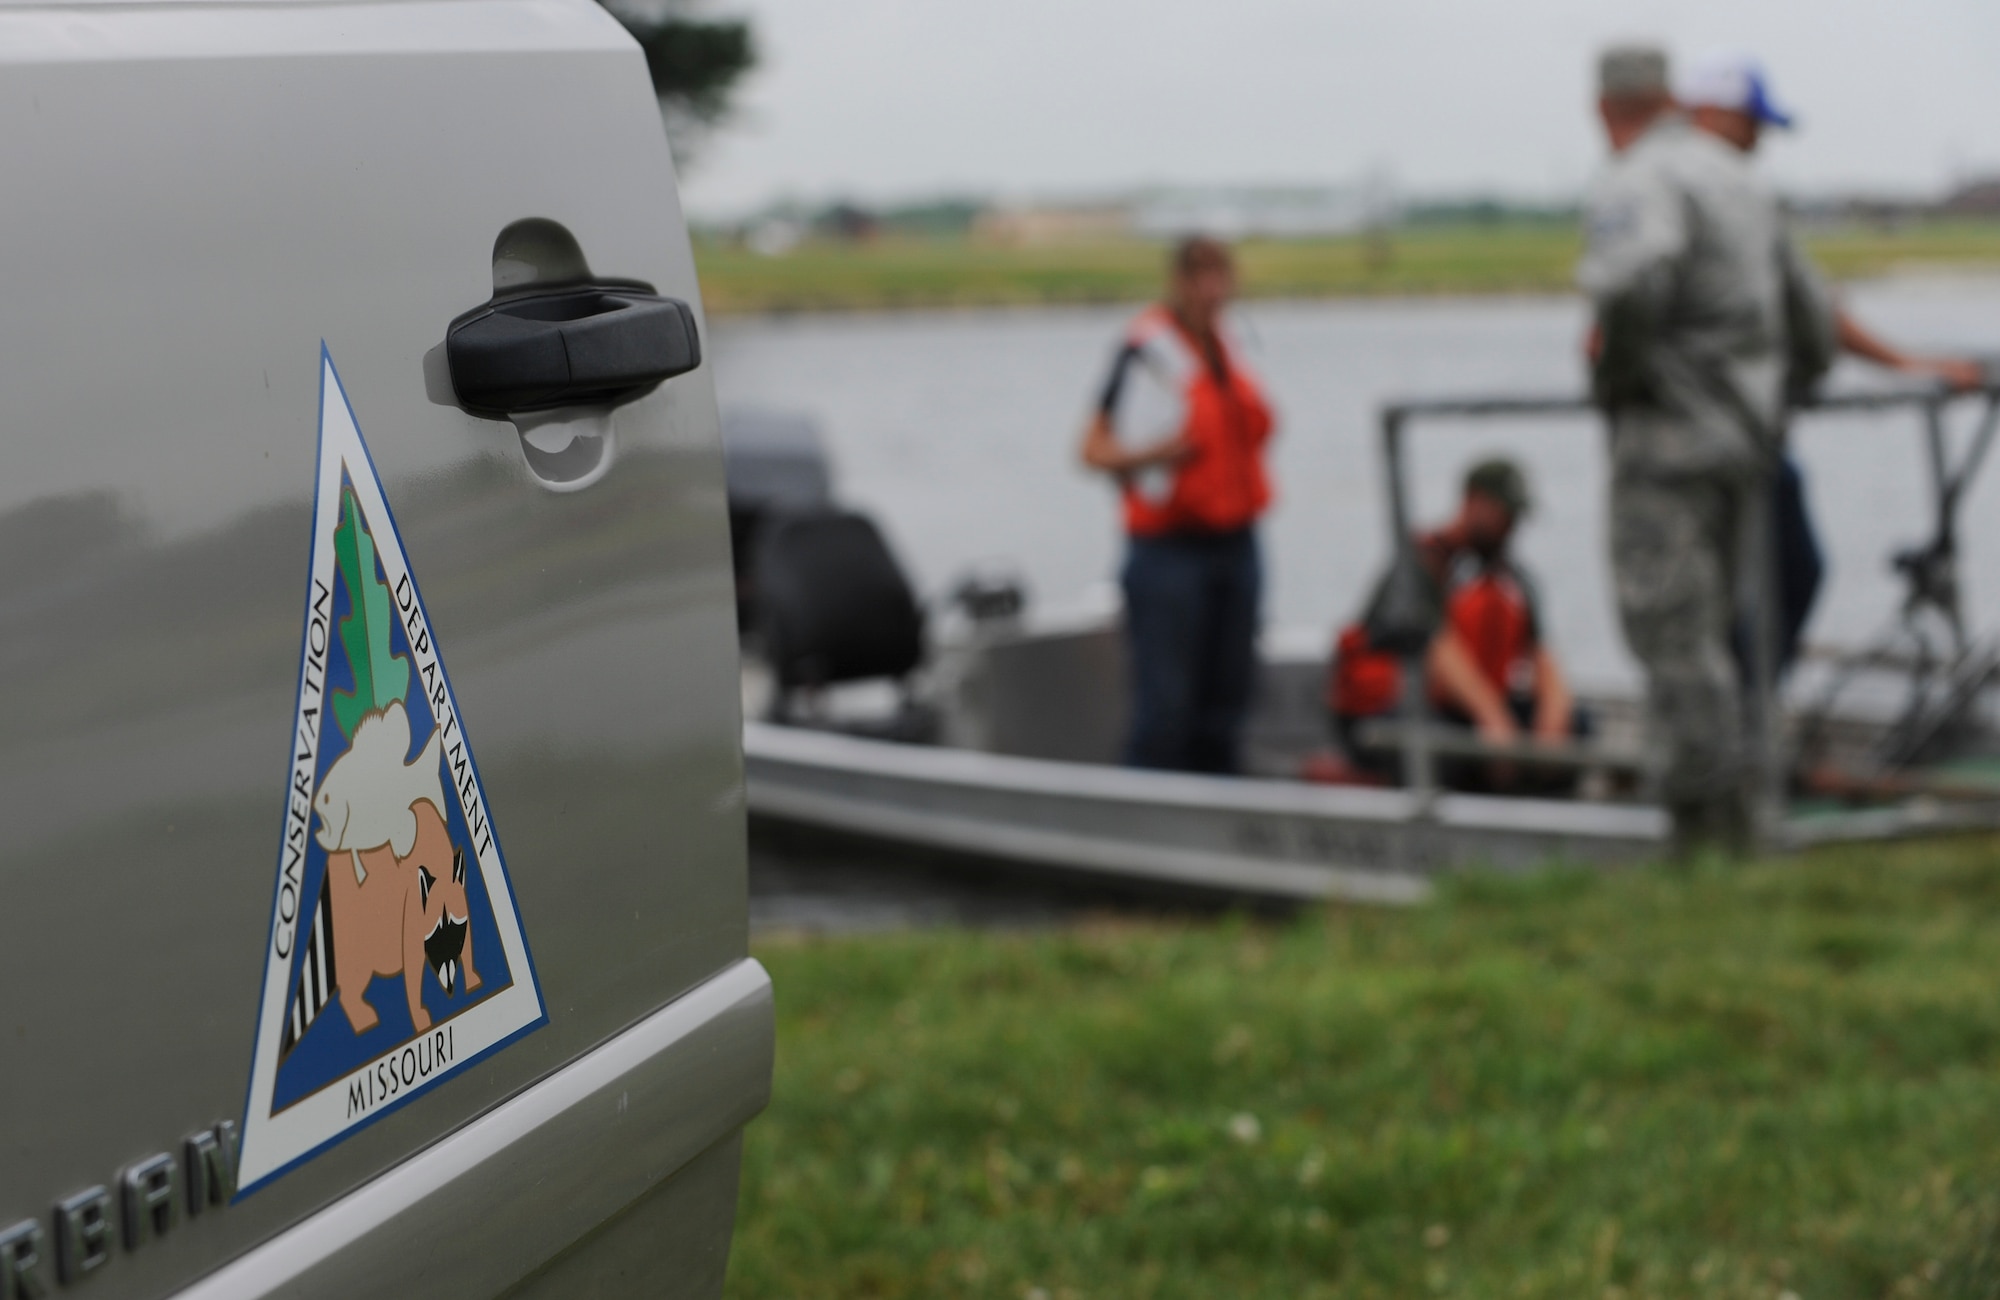 Members of the 509th Civil Engineer Squadron and Missouri Department of Conservation prepare to inspect fish samples they collected from Ike Skelton Lake using electrofishing at Whiteman Air Force Base, Mo., June 21, 2016. Electrofishing uses two electrodes, a cathode and an anode, which draw the fish closer to the boat, making it easier for them to be caught by a net. (U.S. Air Force photo by Senior Airman Danielle Quilla)